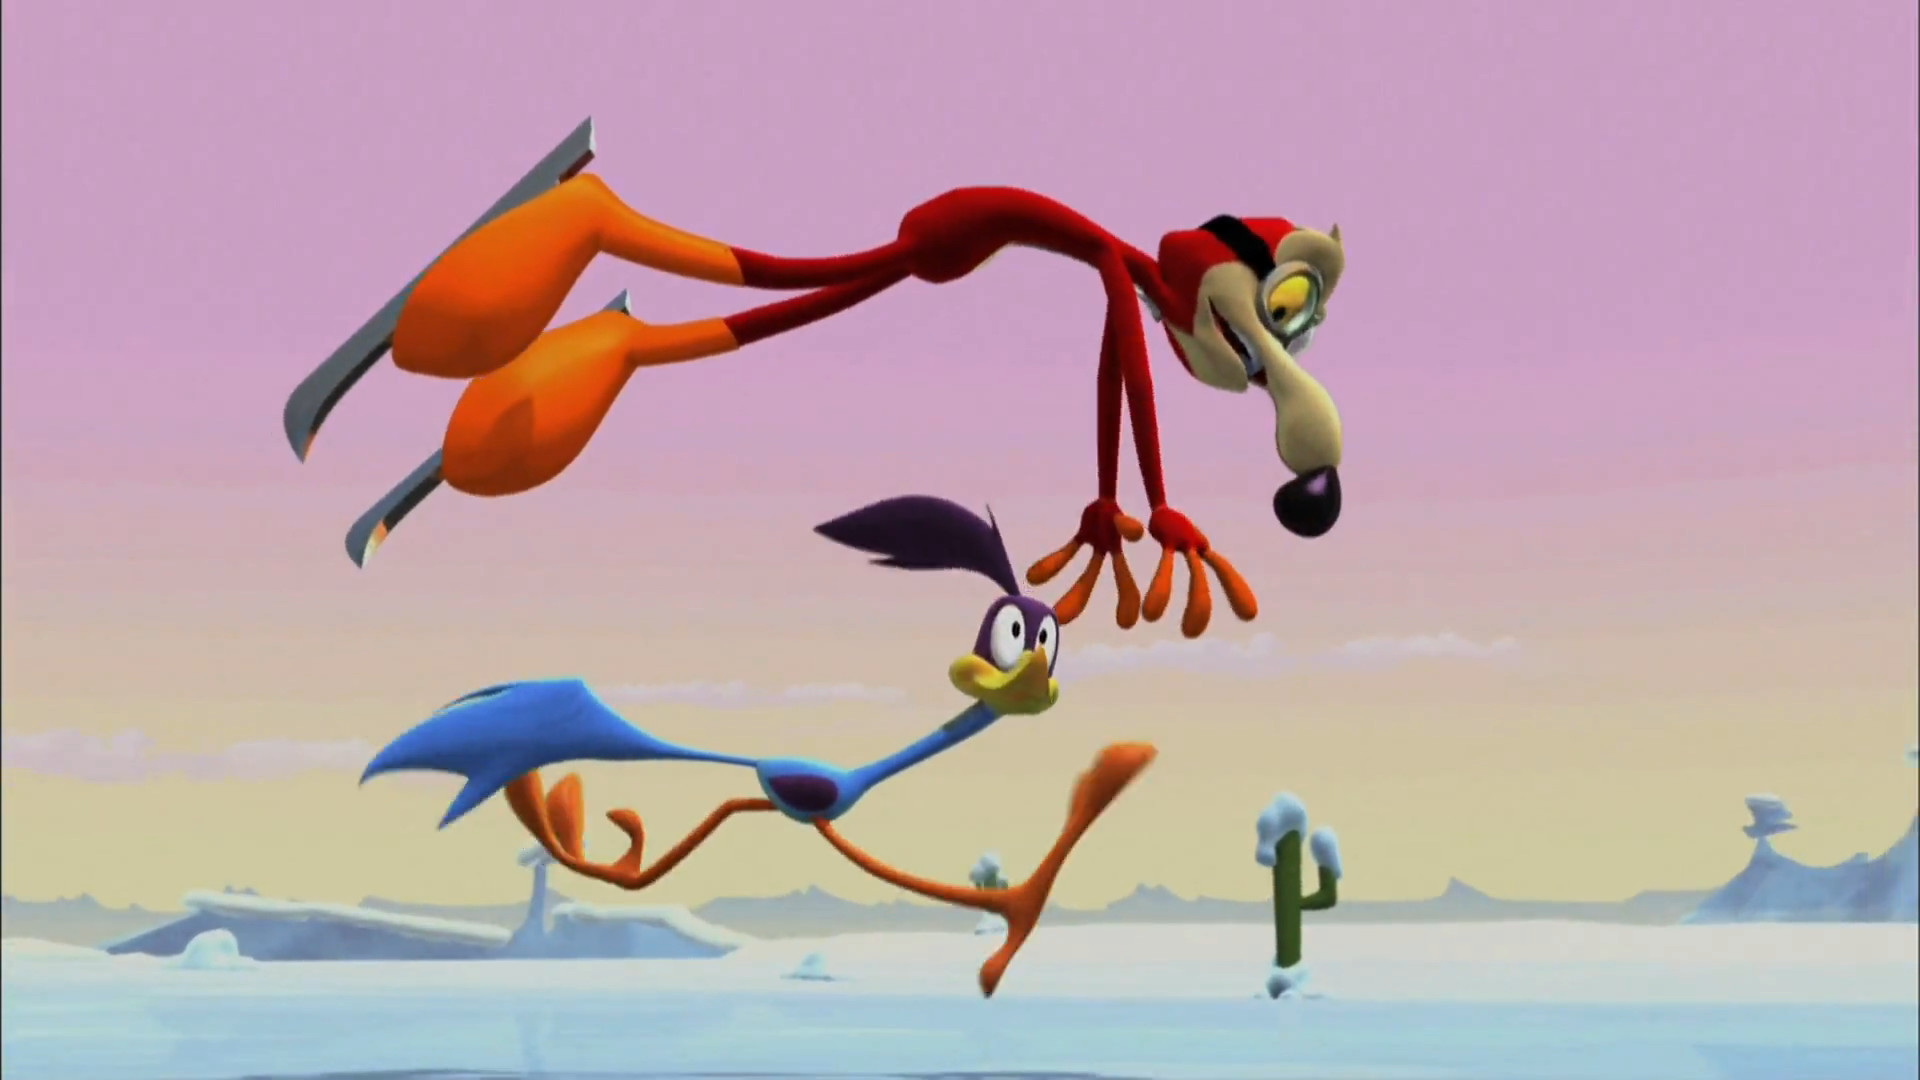 1920x1080 Image - Wile E. Coyote and Road Runner.png | The Looney Tunes Show Wiki |  FANDOM powered by Wikia